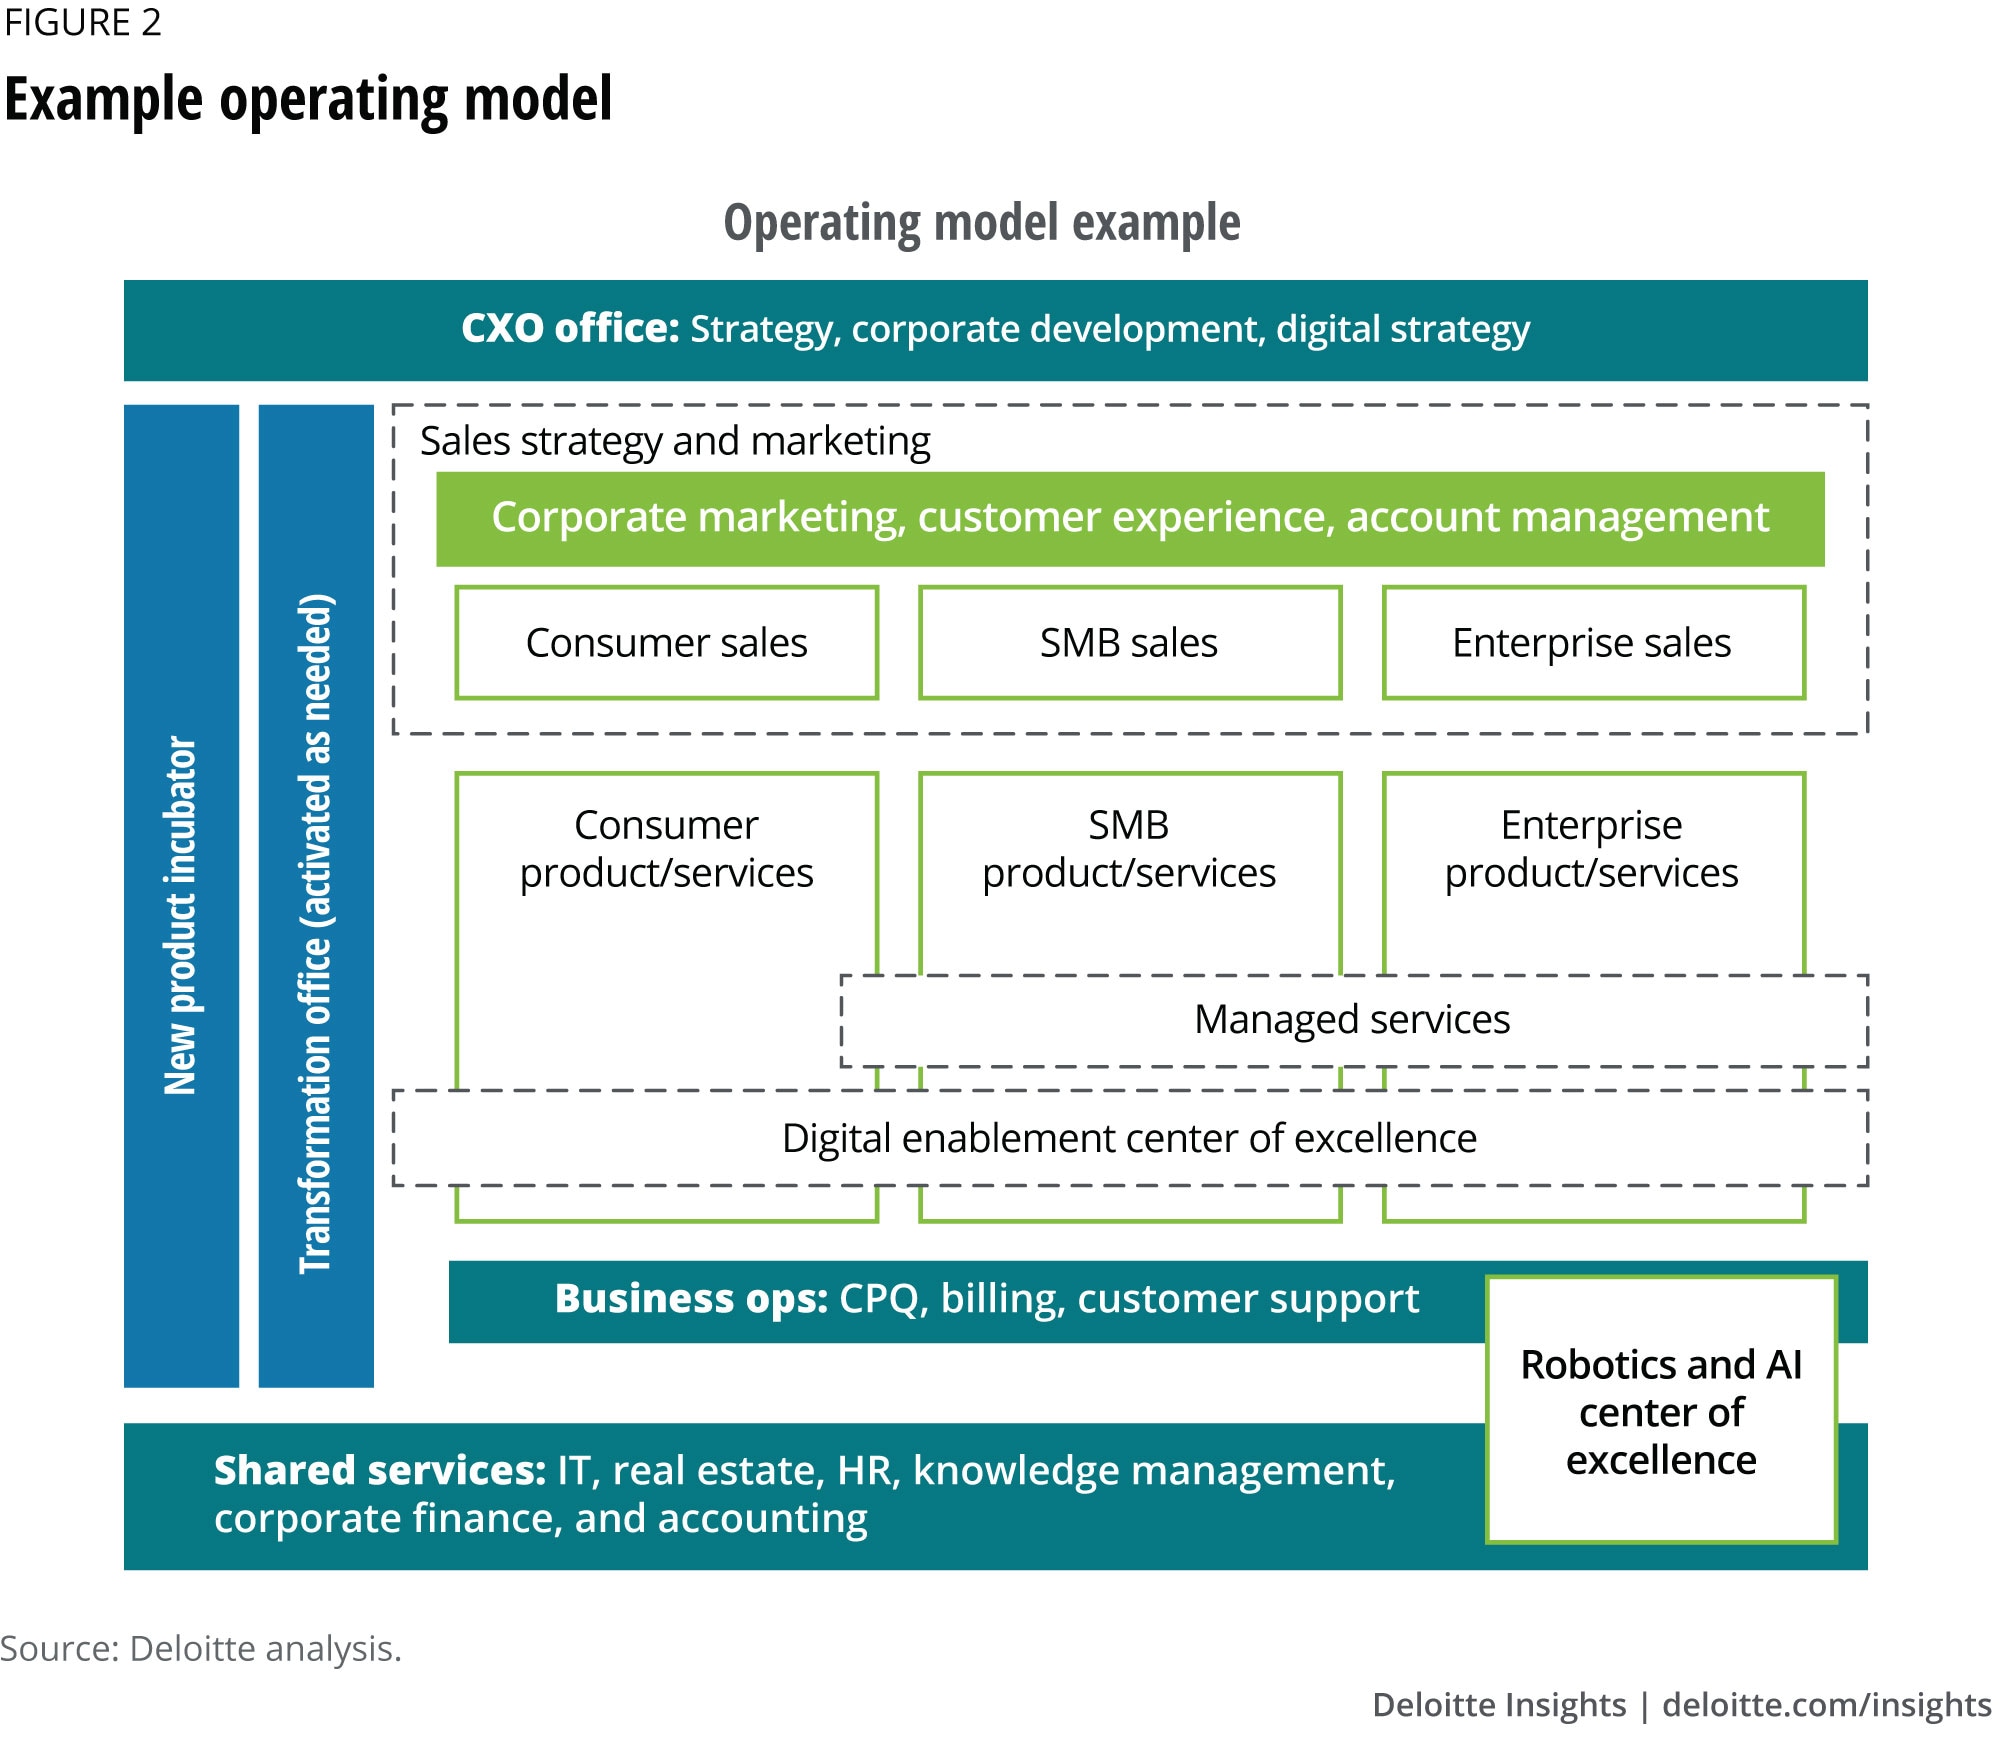 Example operating model